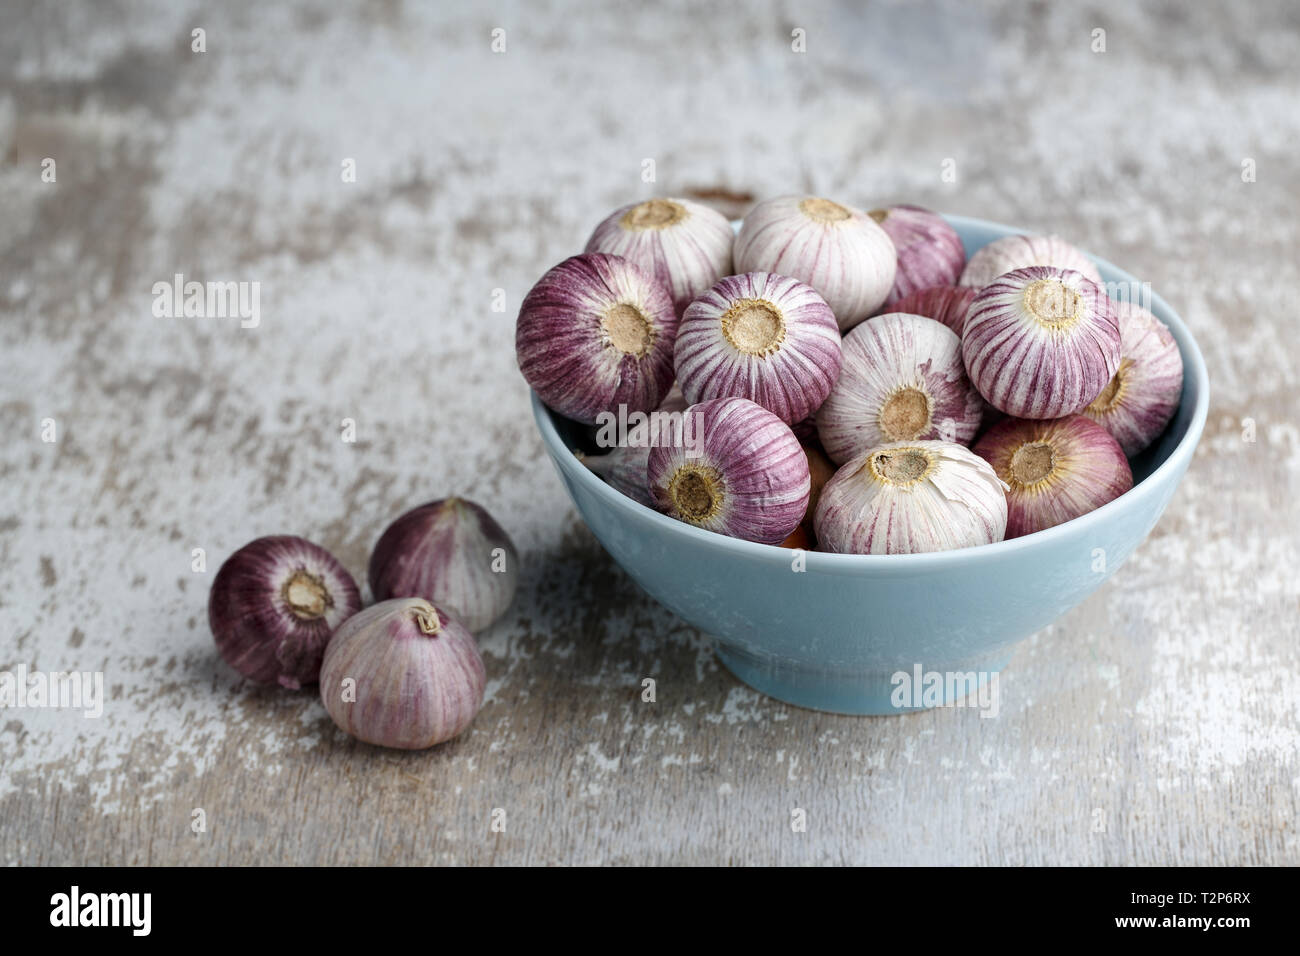 Whole Bulbs of Chinese Garlic in blue bowl Stock Photo